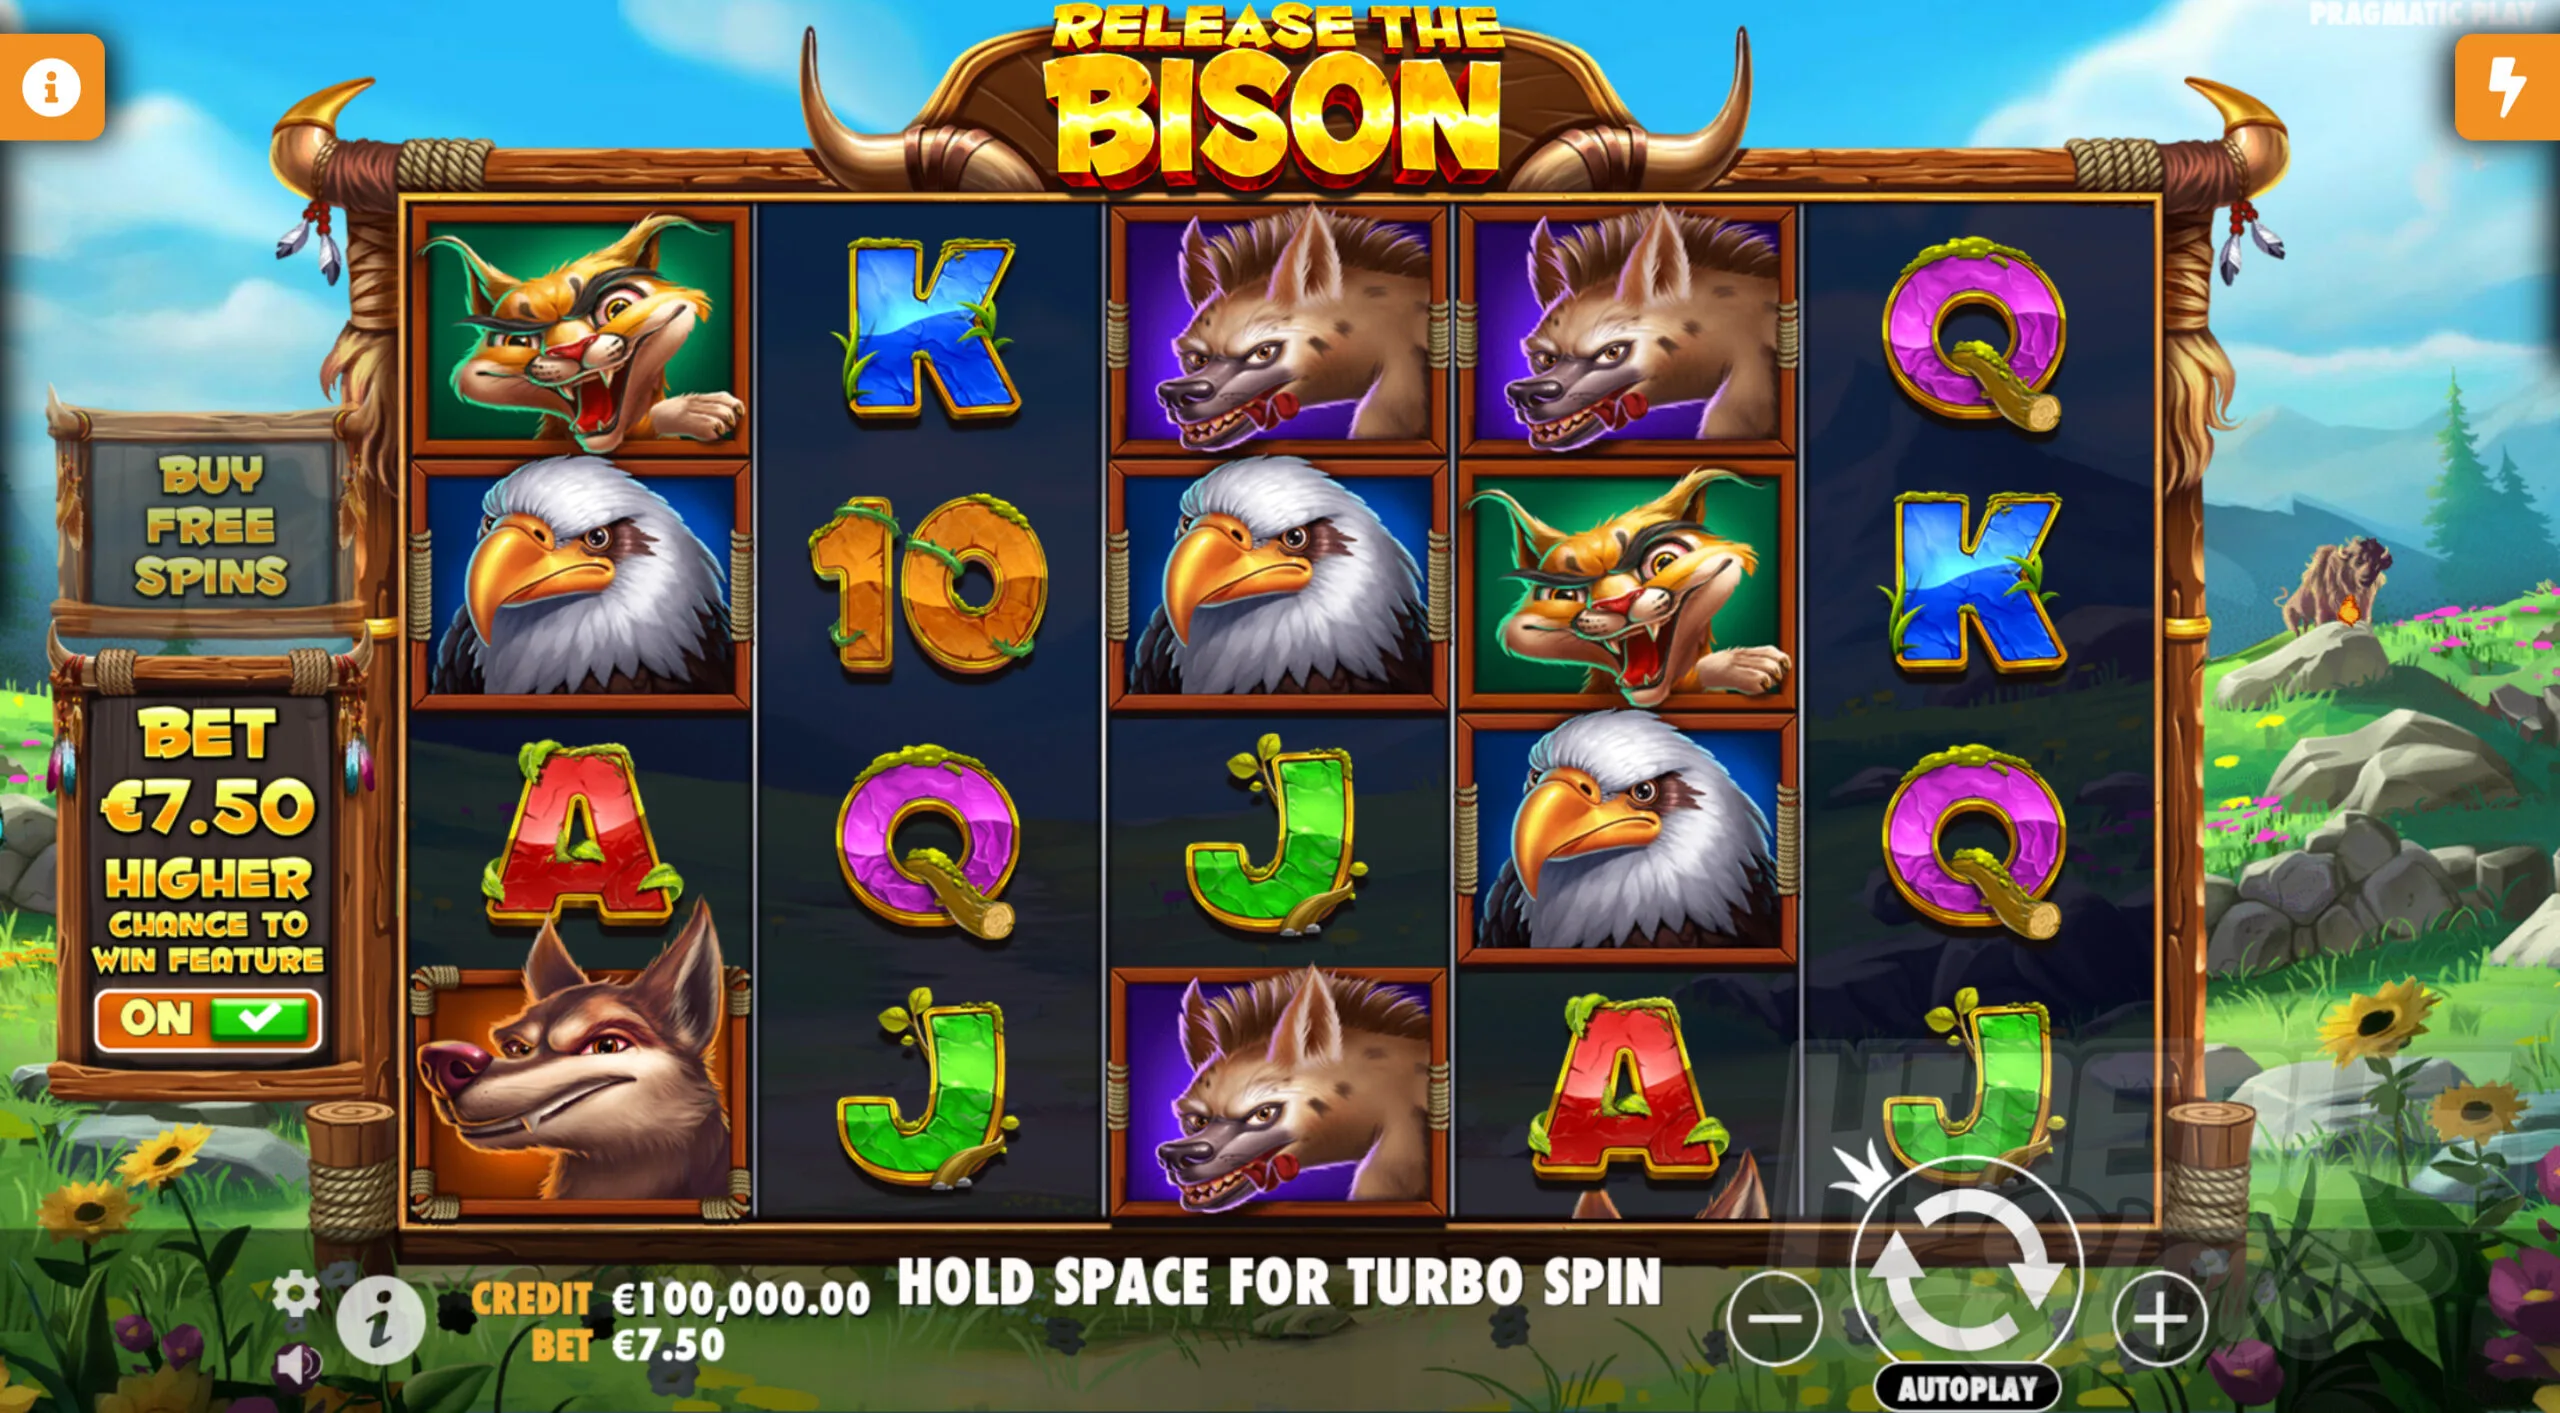 Release the Bison Base Game